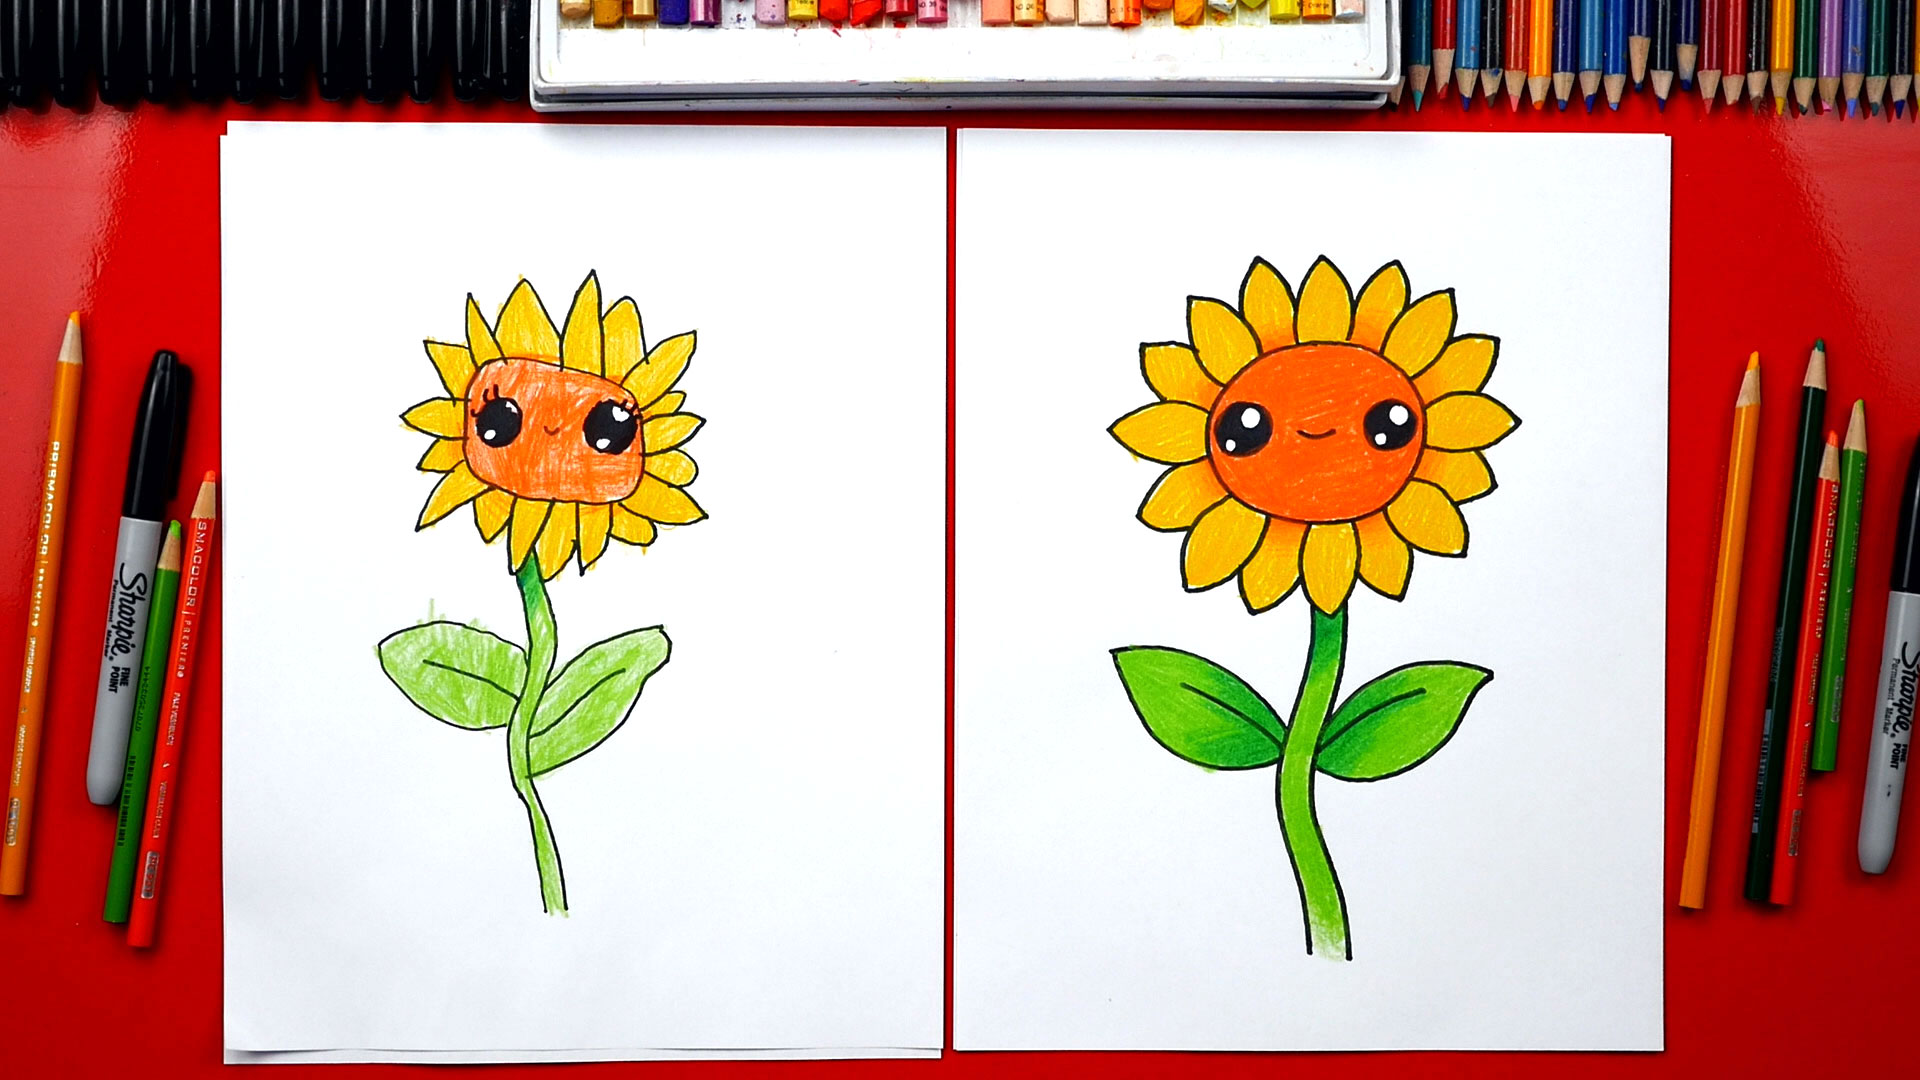 How To Draw A Sunflower - Art For Kids Hub